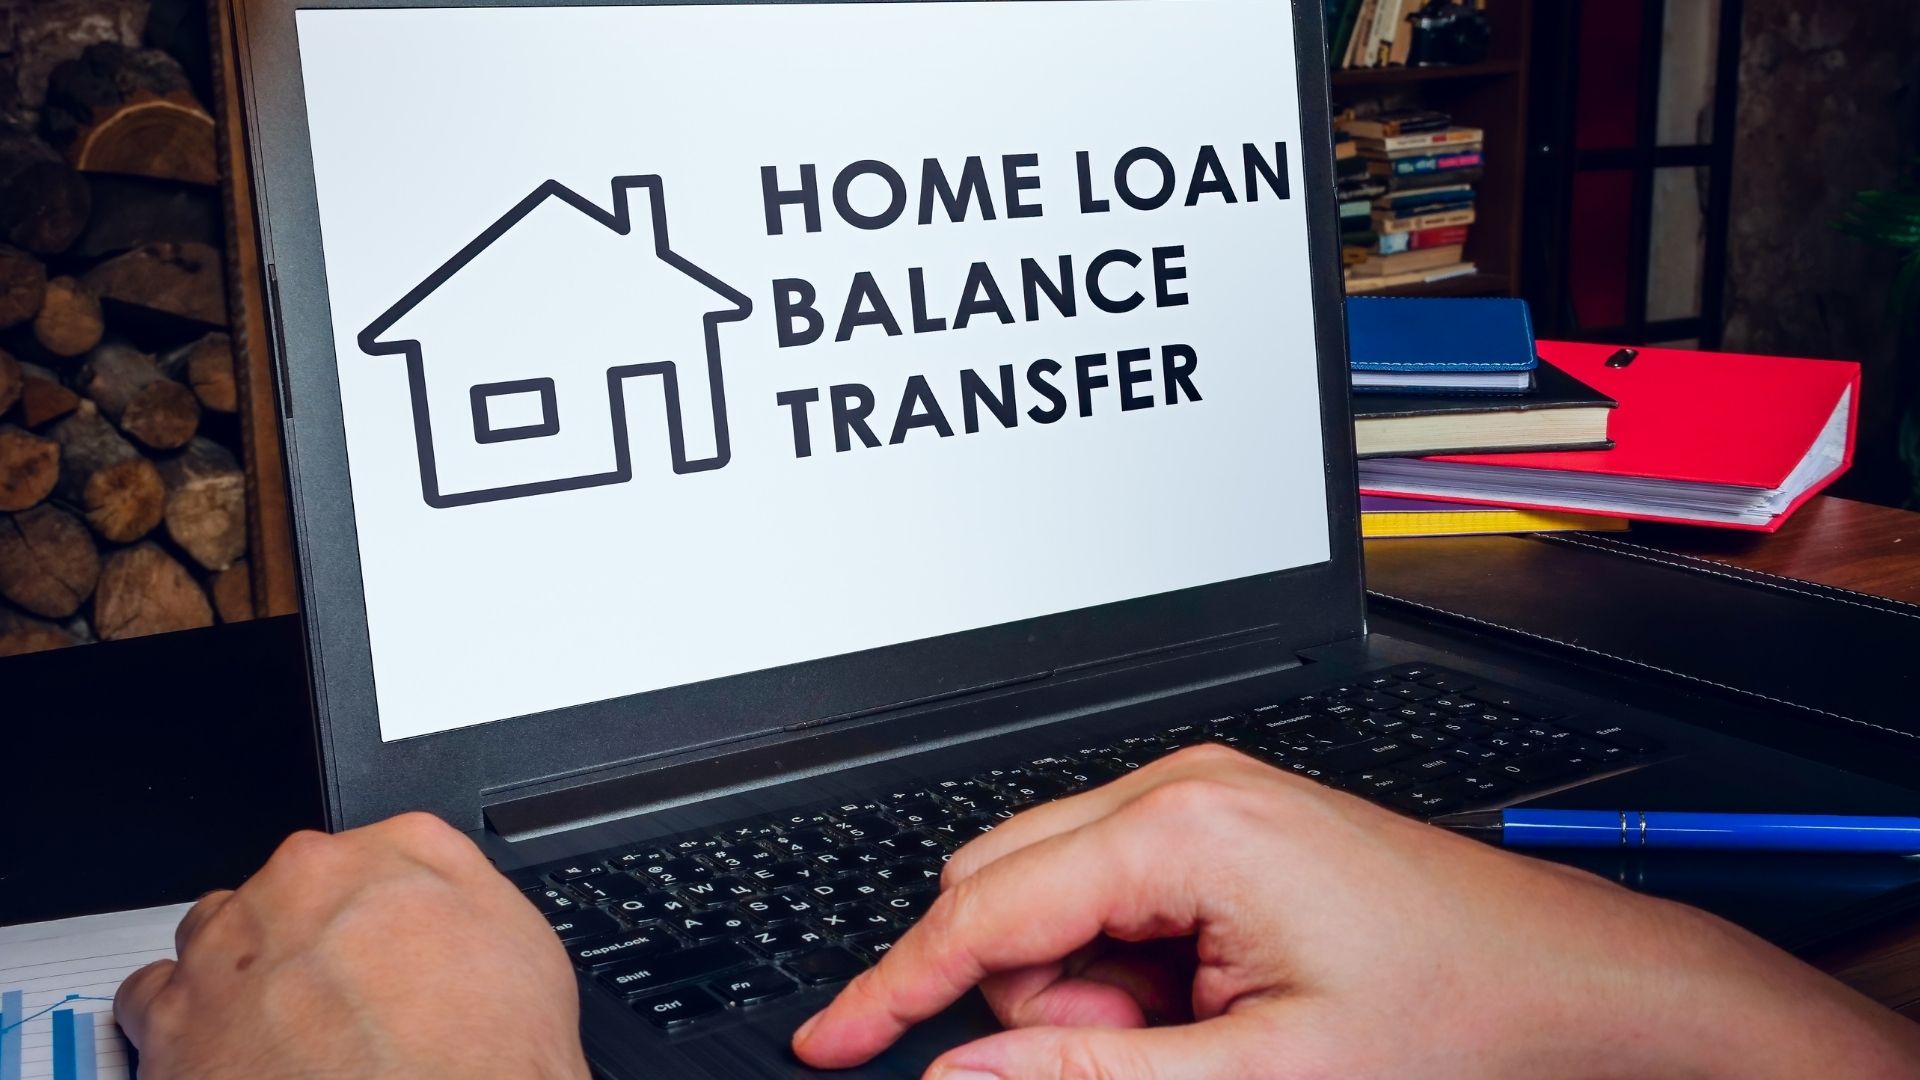 Home Loan Balance Transfer: Points To Remember